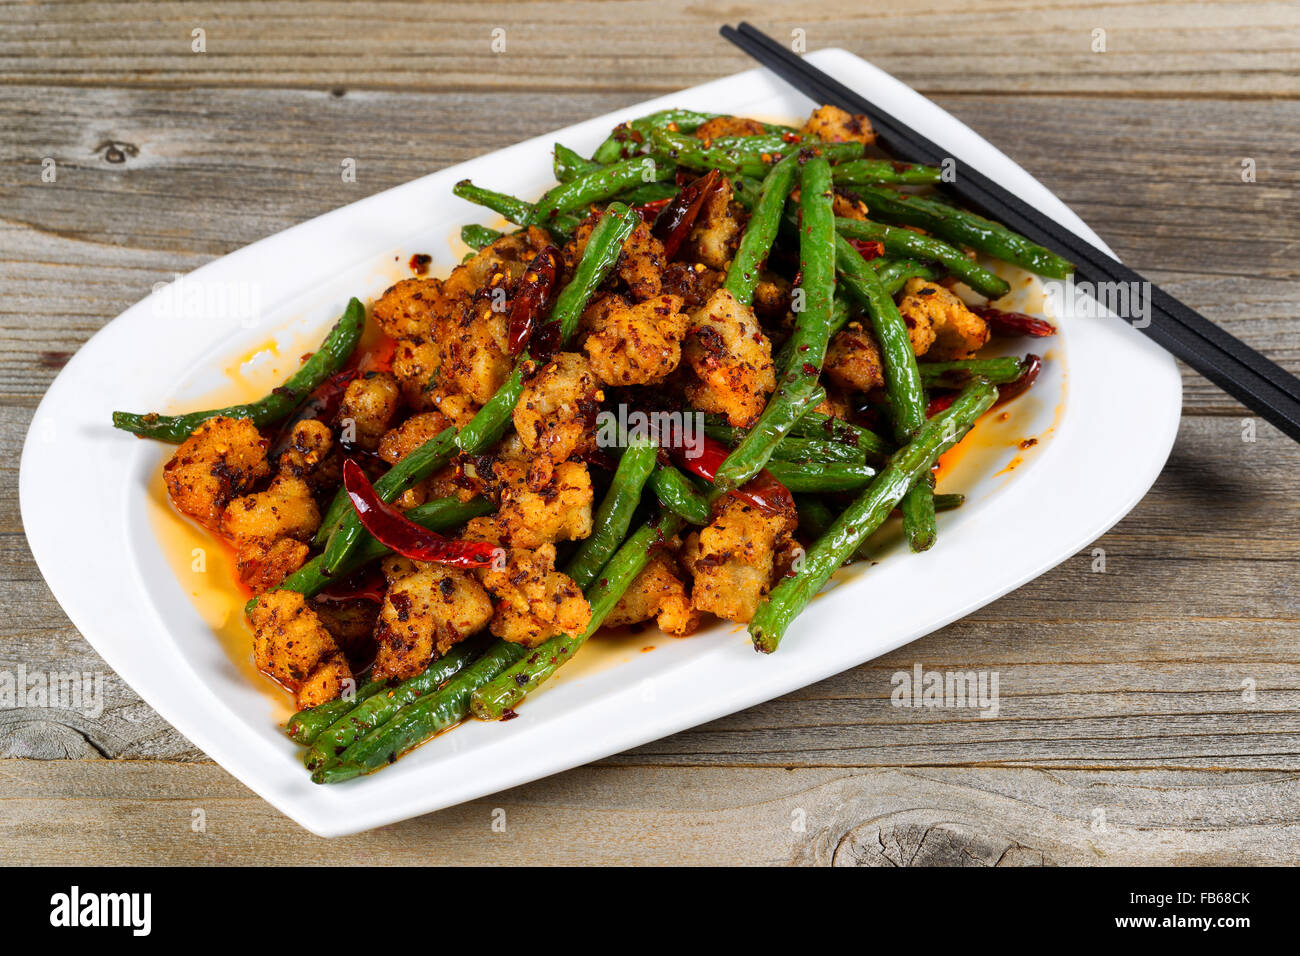 Close up view of crispy fried chicken pieces with green beans and Chile peppers on rustic wood setting. Stock Photo